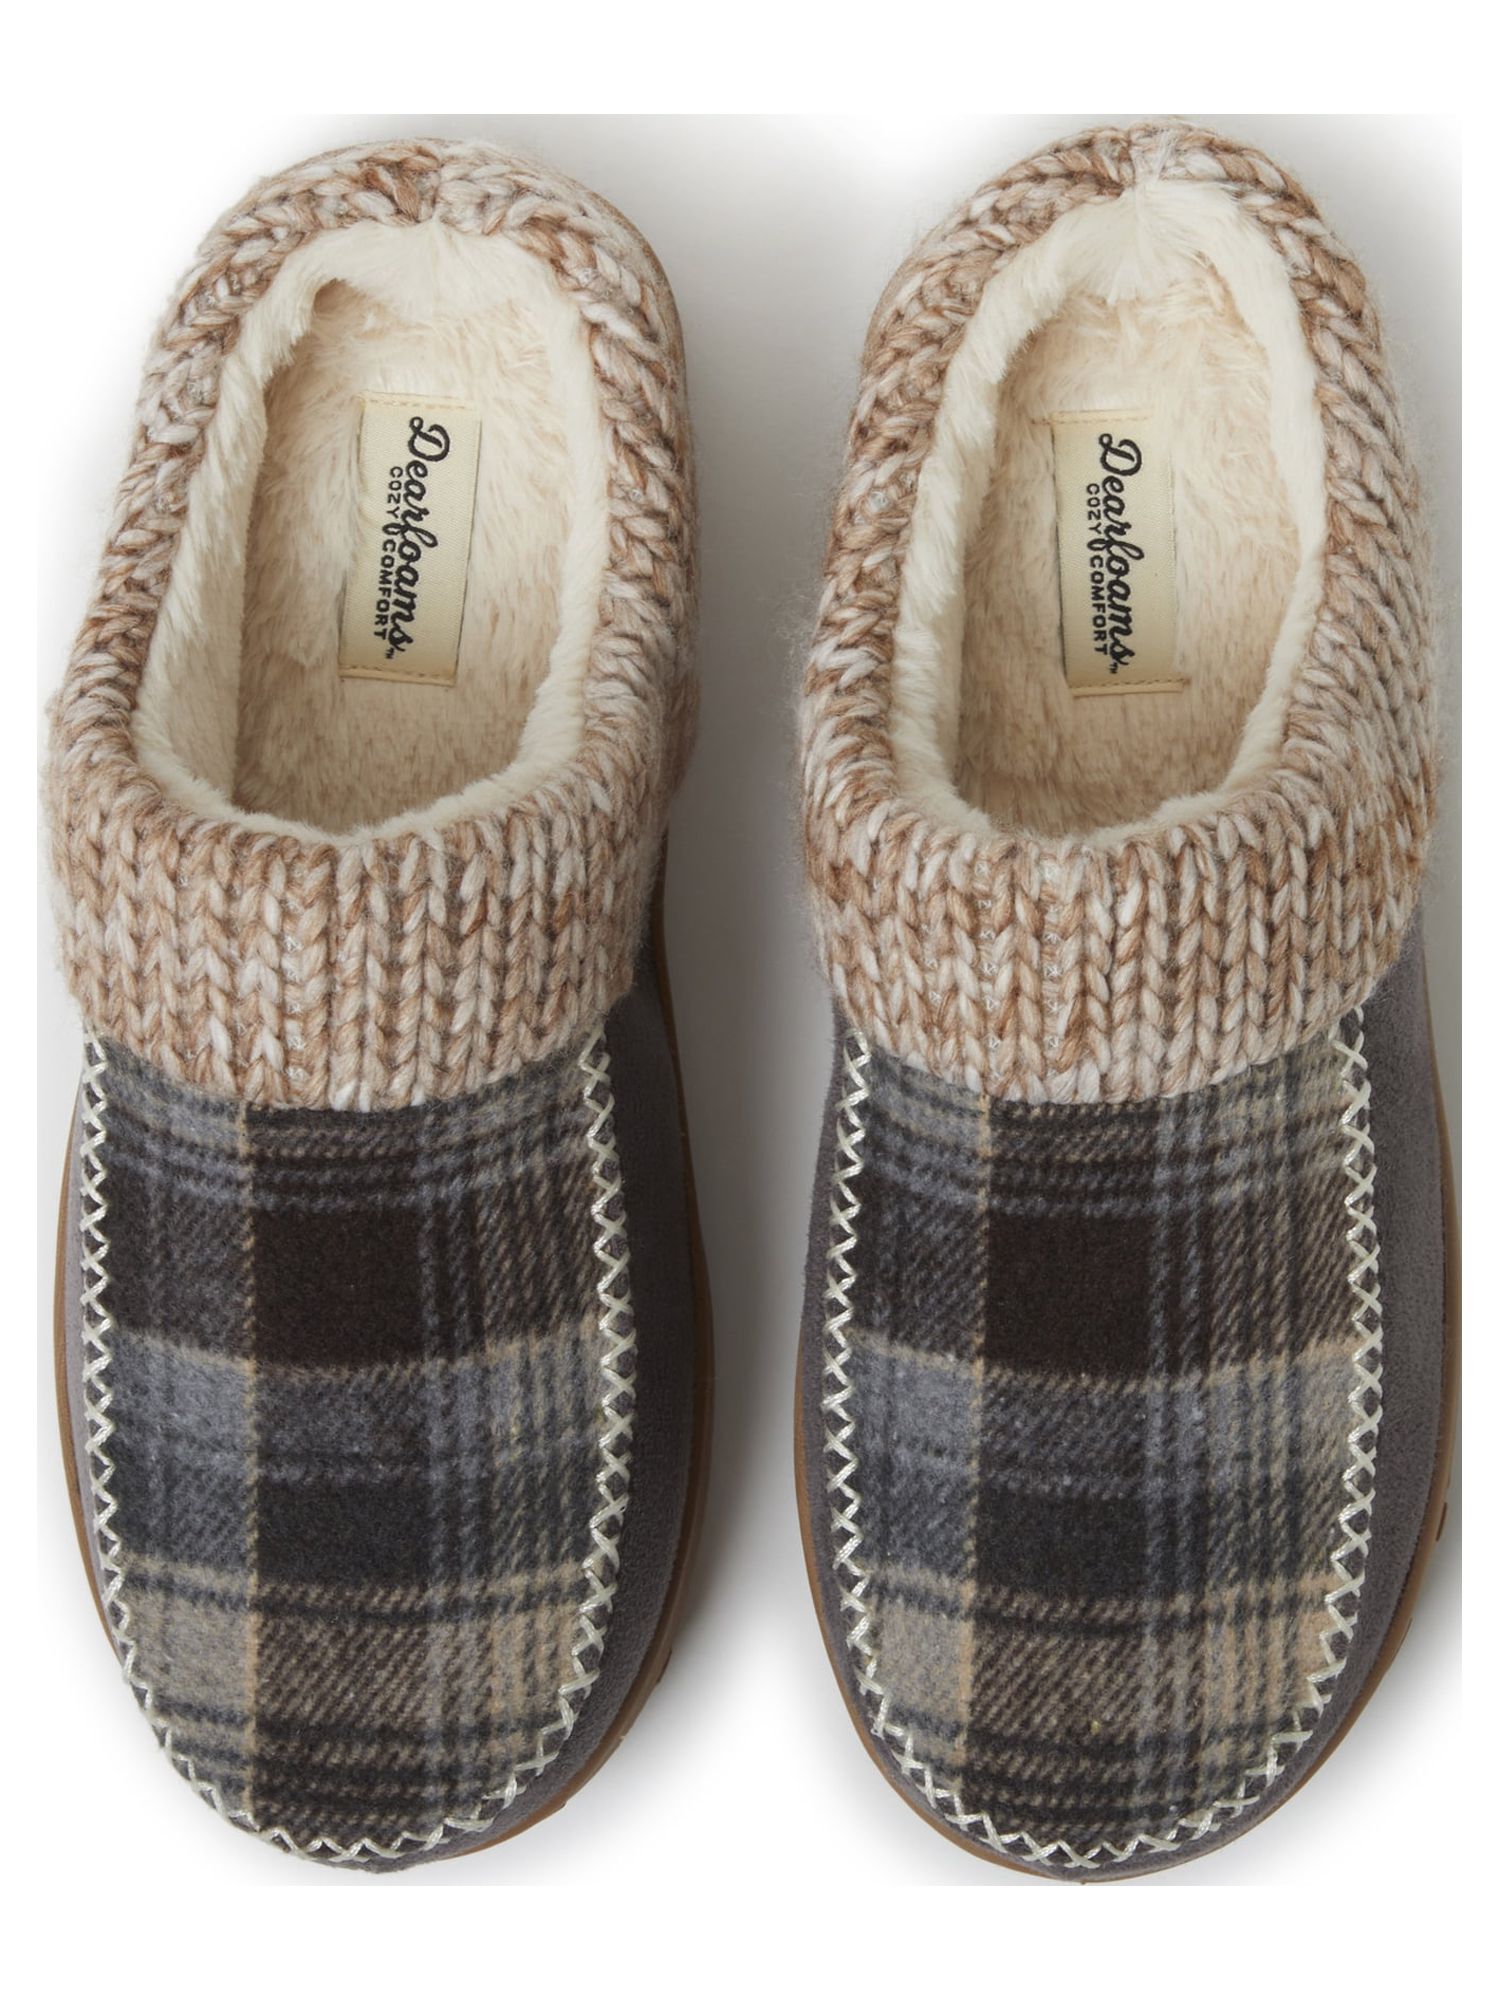 Dearfoams Cozy Comfort Women's Moc Toe Clog Slippers with Chunky Knit Collar - image 5 of 7